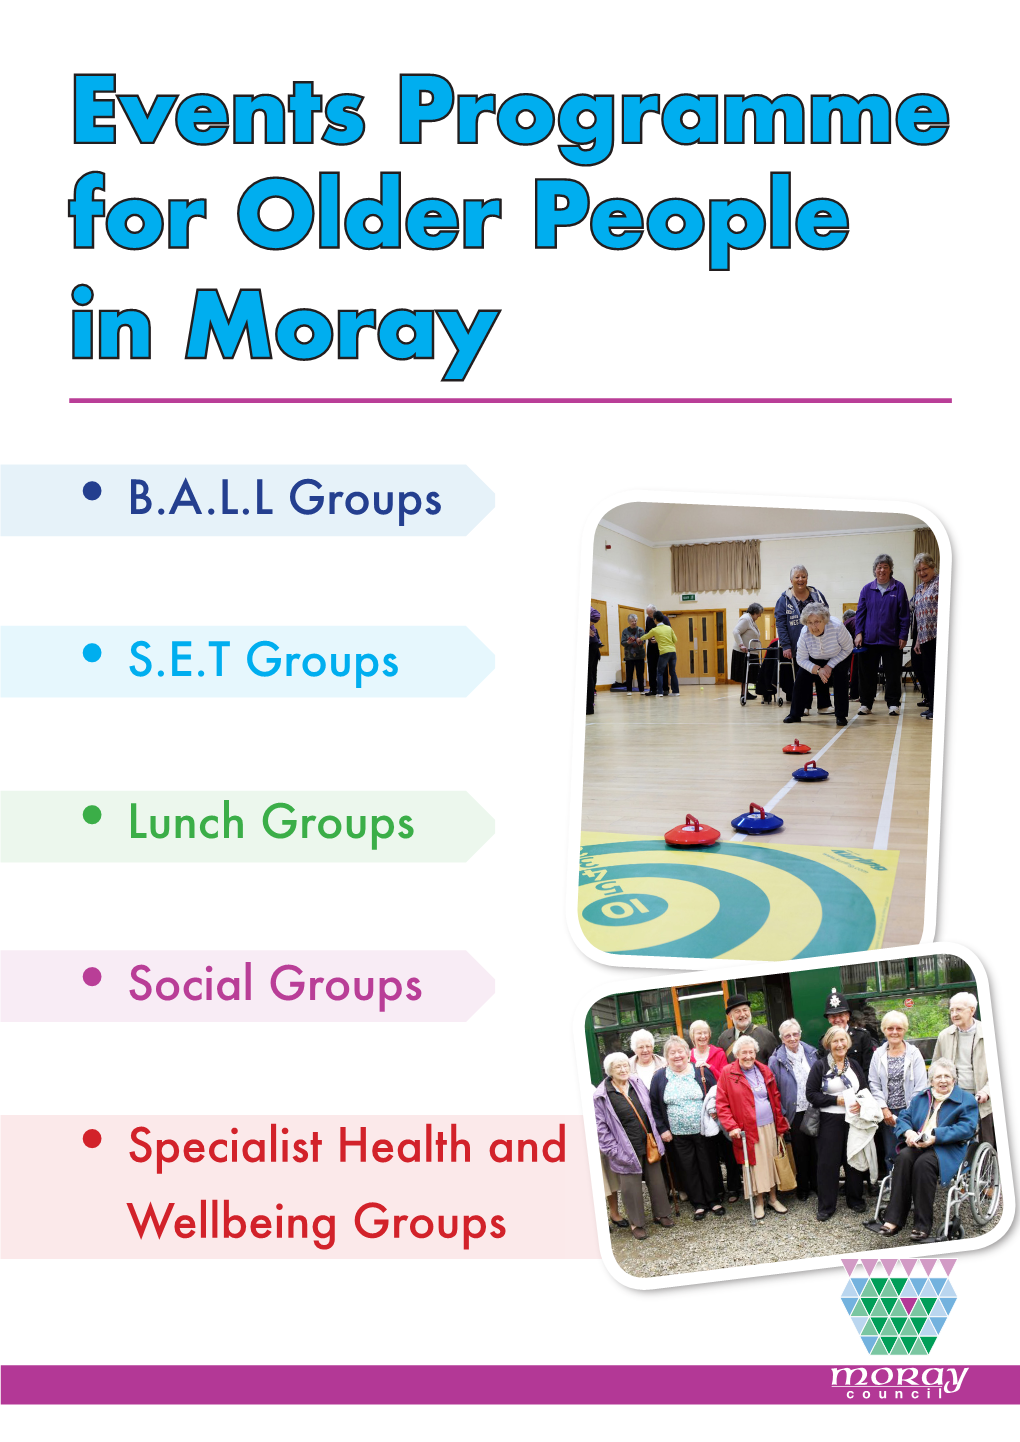 Events Programme for Older People in Moray